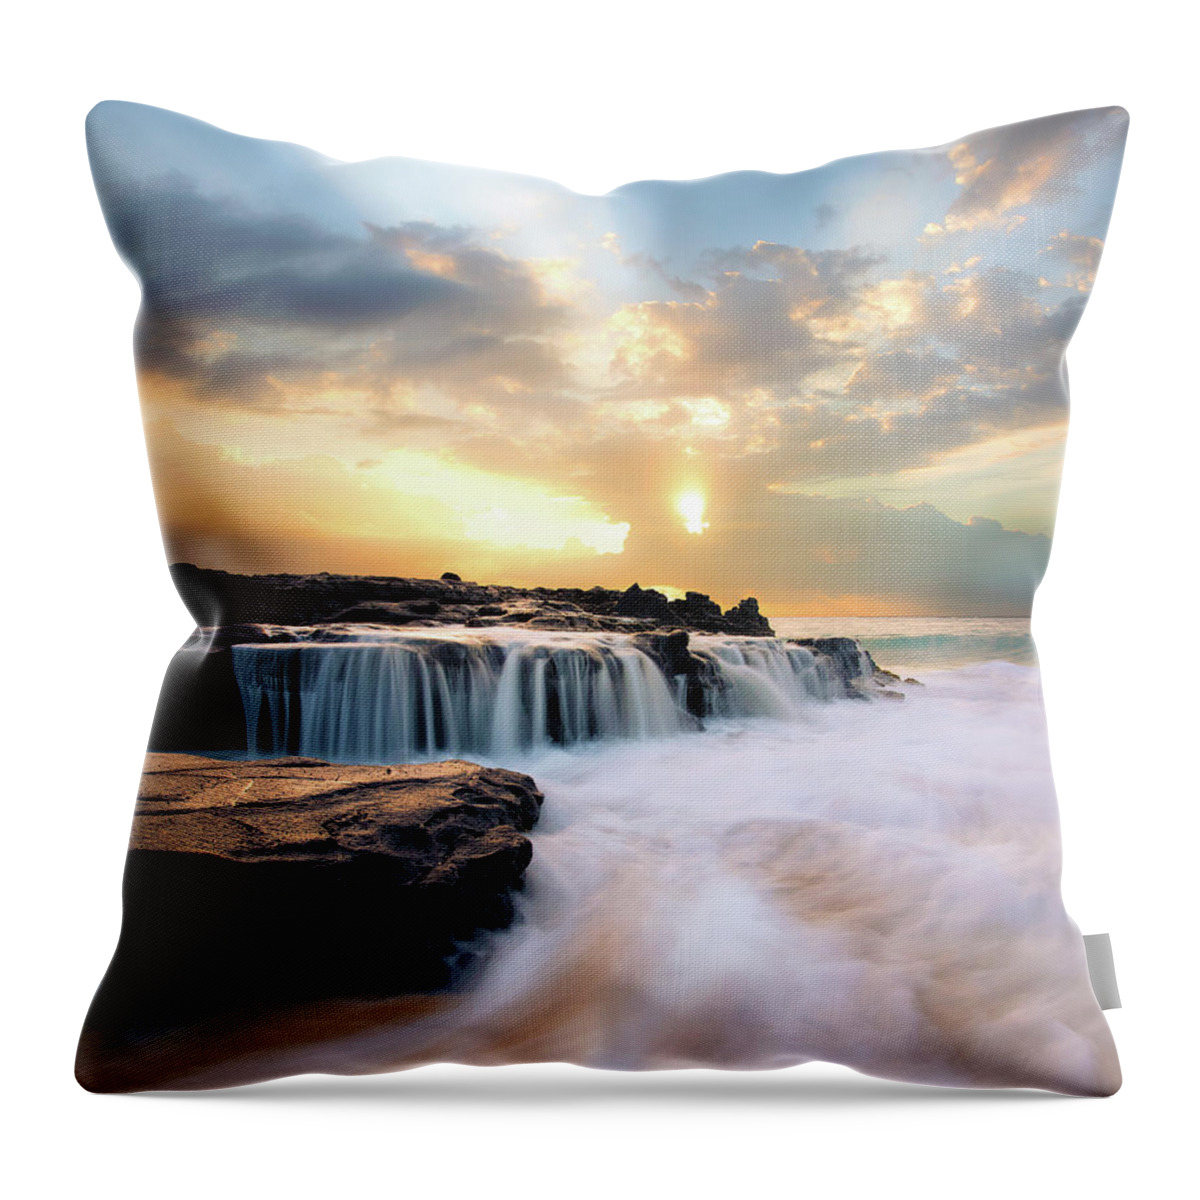  Throw Pillow featuring the photograph Shine On by Micah Roemmling